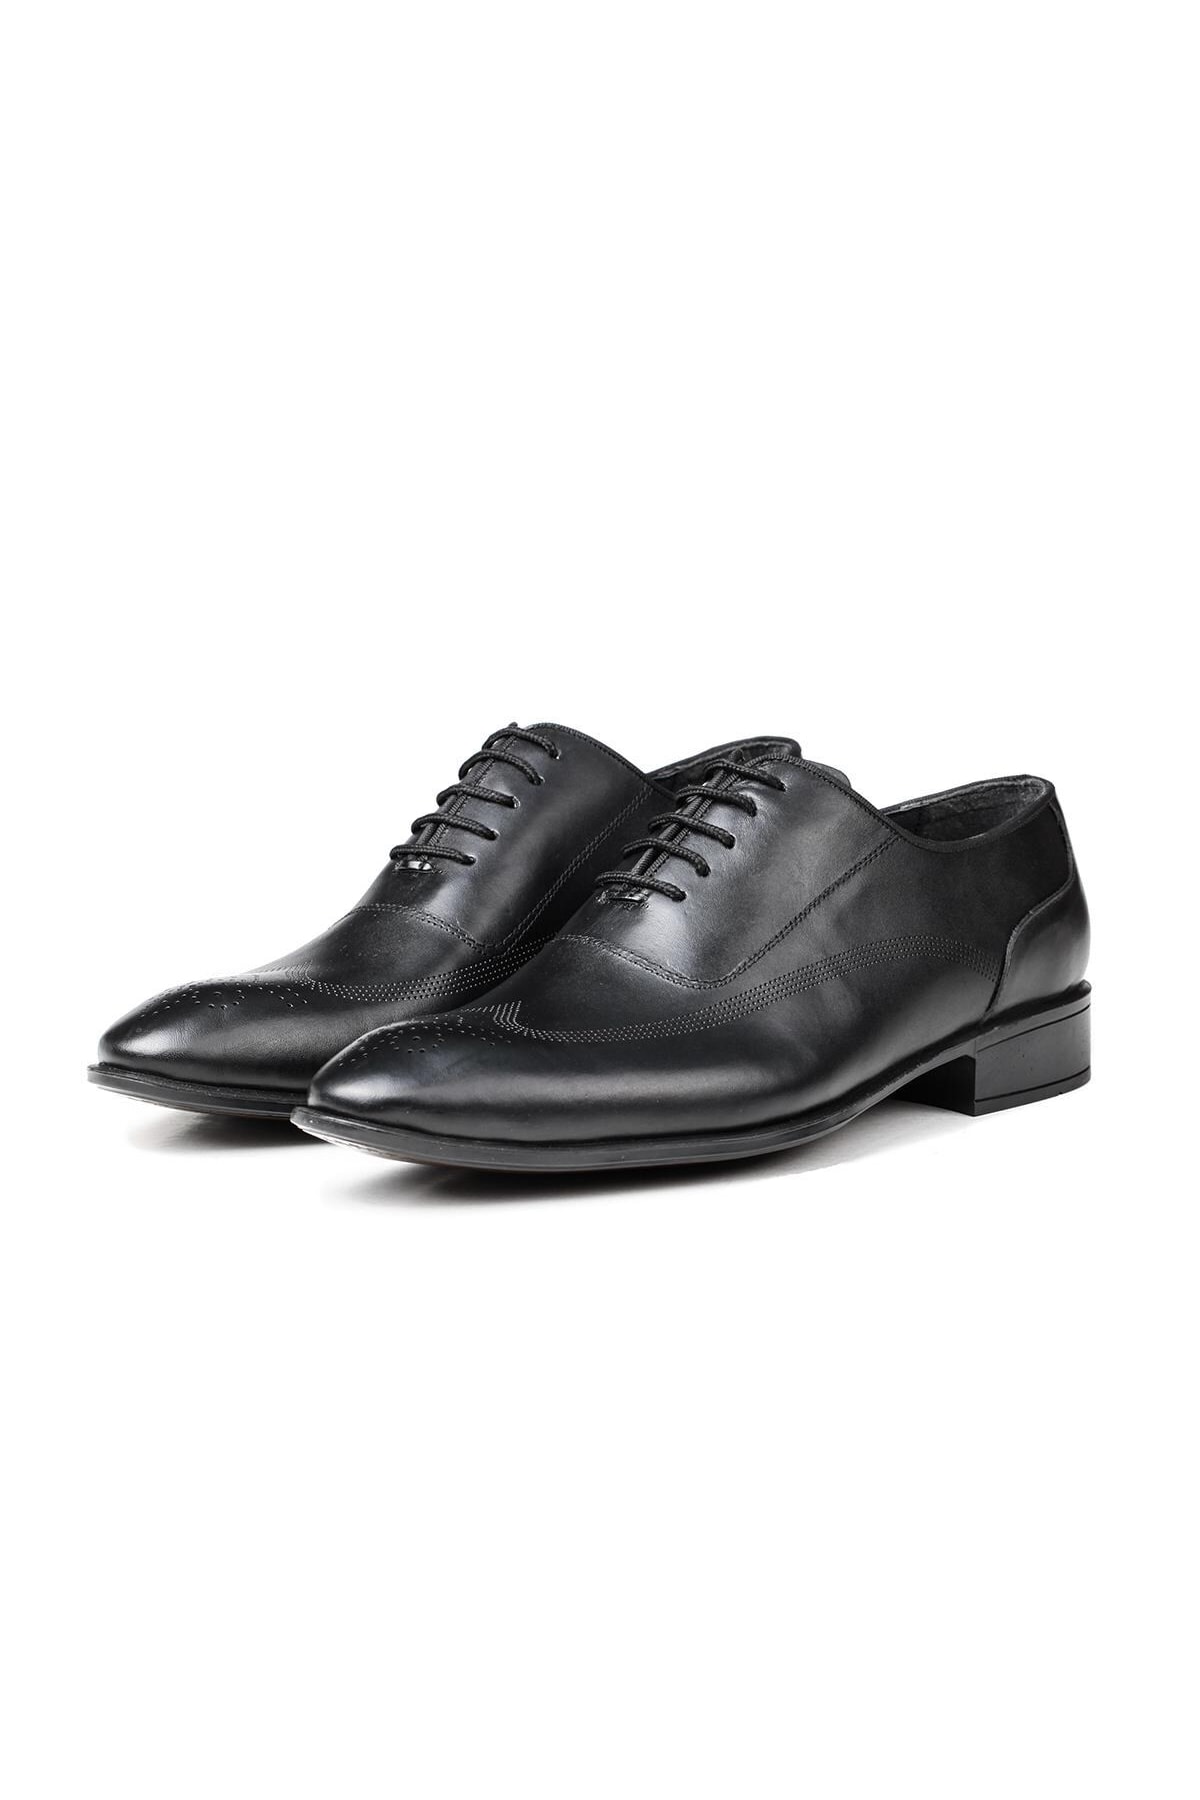 Ducavelli Stylish Genuine Leather Men's Oxford Lace-Up Classic Shoe.